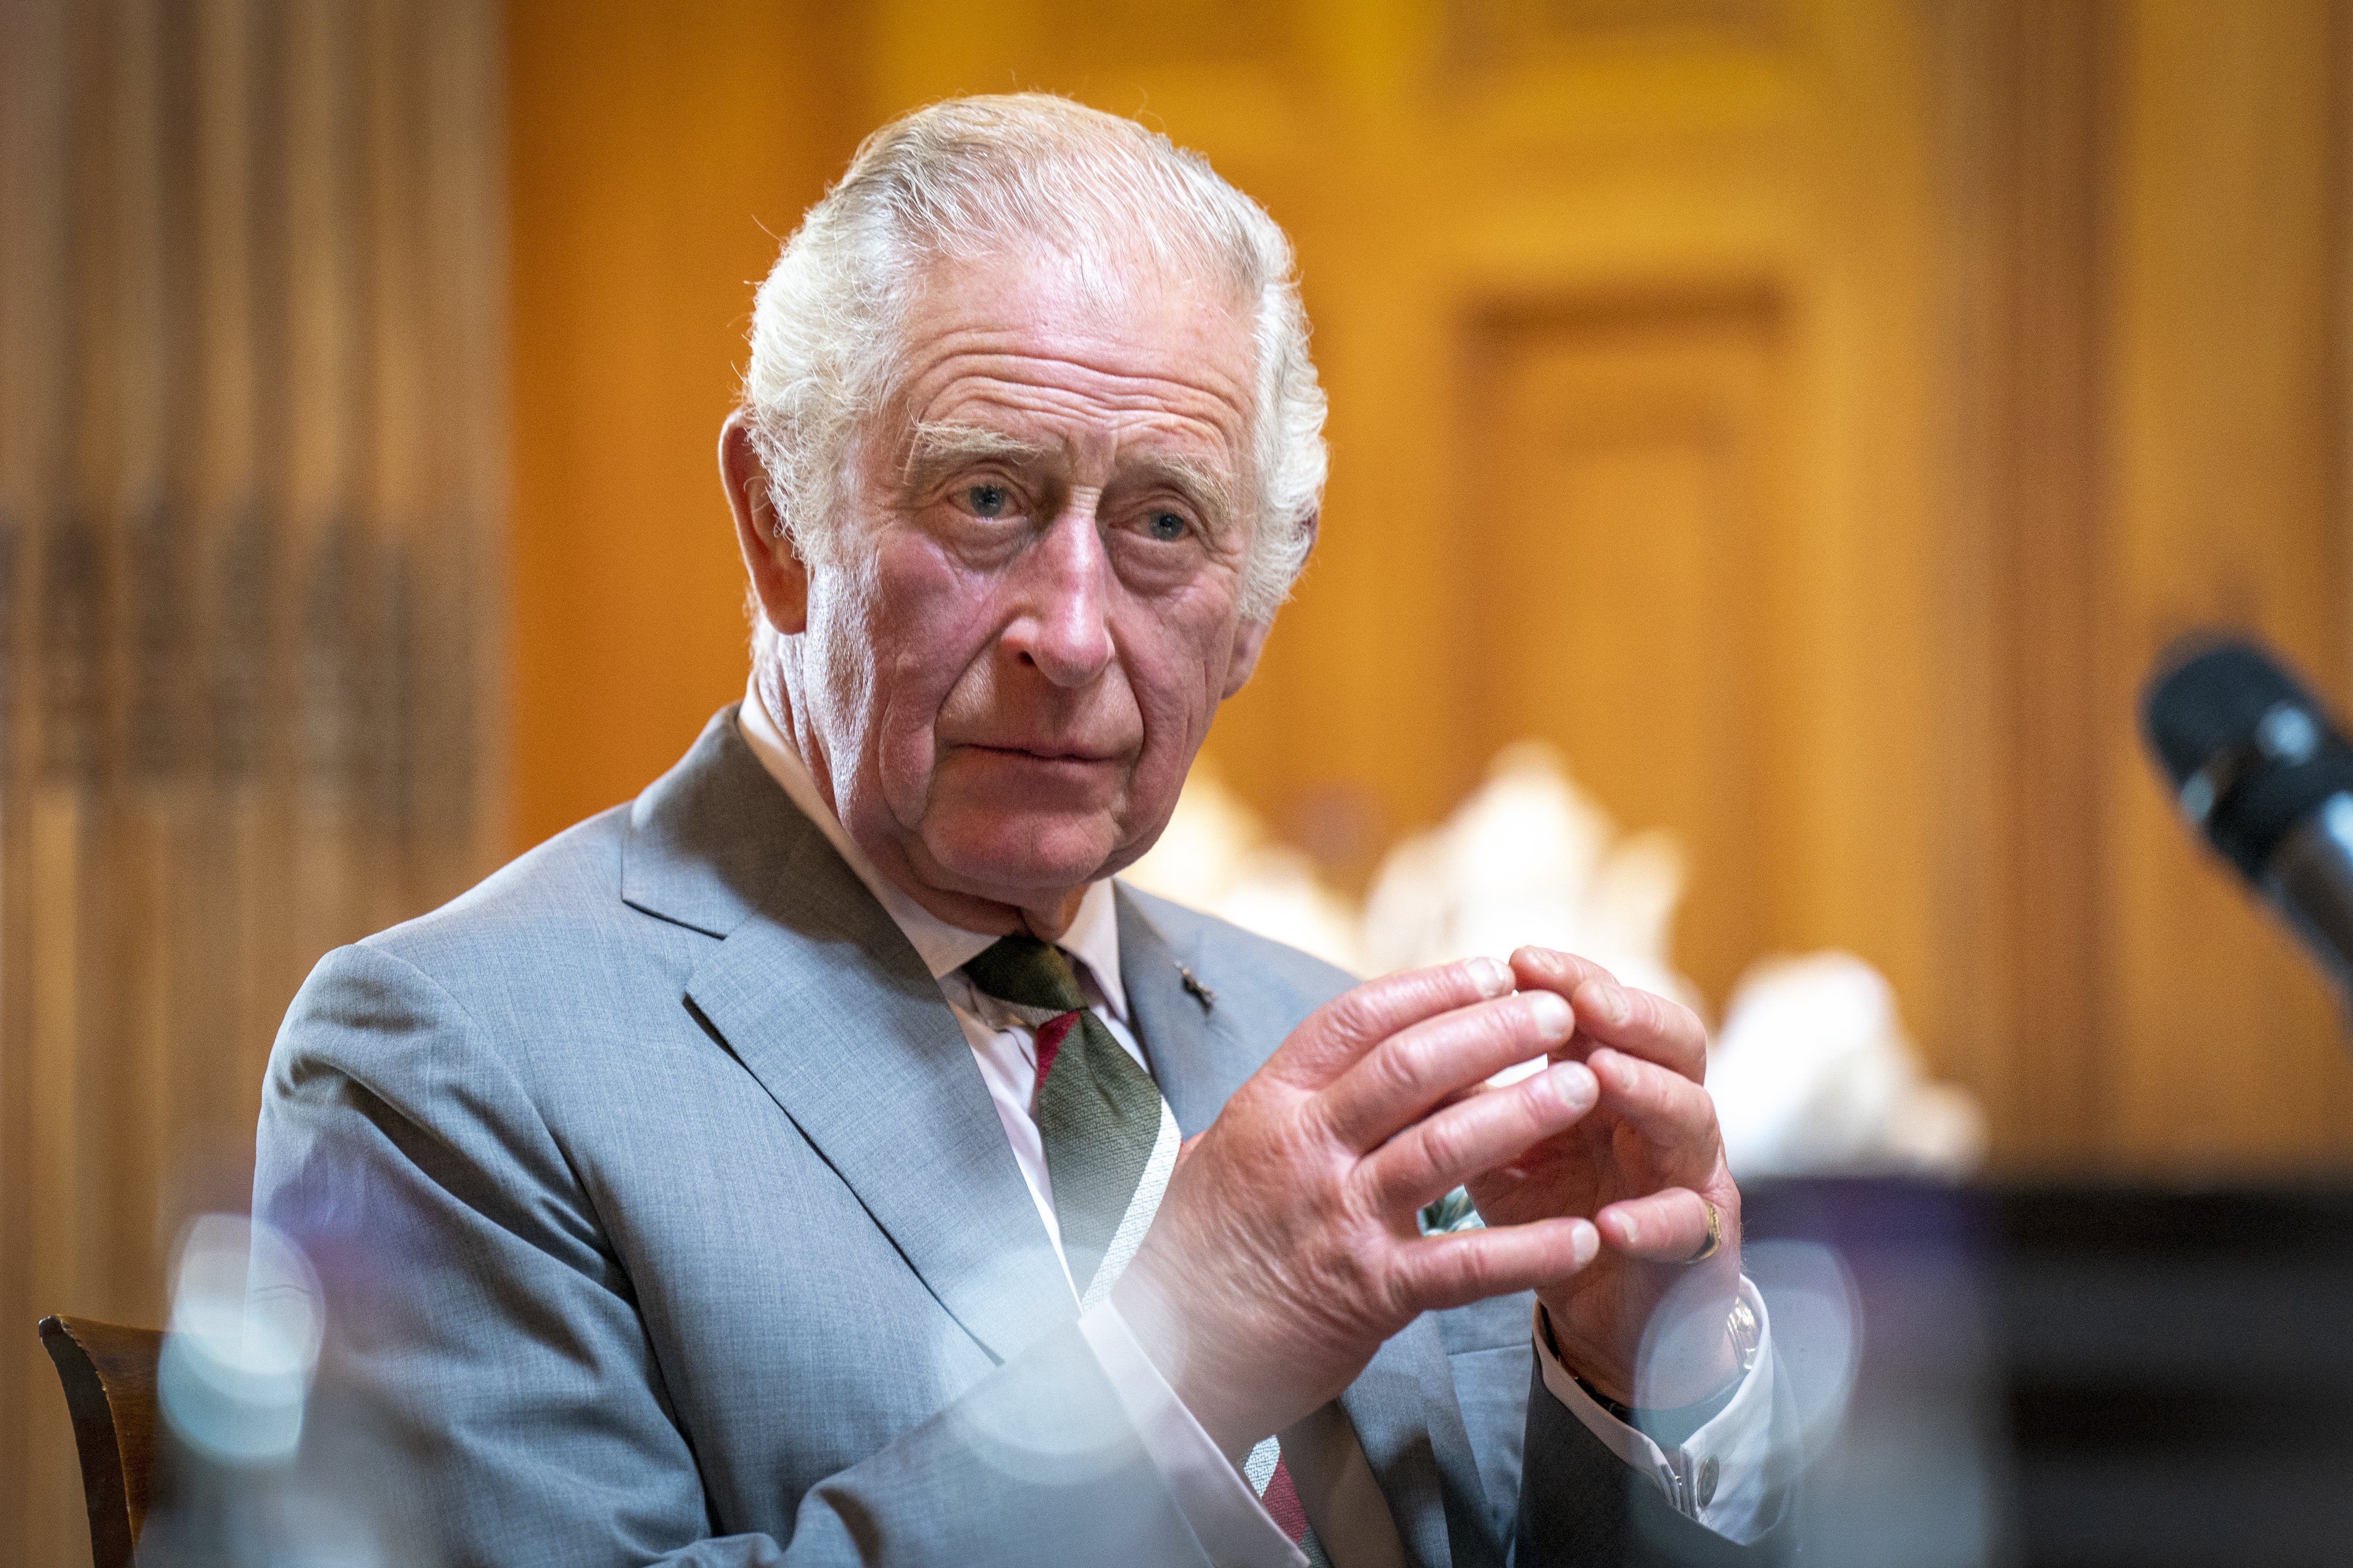 The Prince of Wales, known as the Duke of Rothesay while in Scotland, during a roundtable with attendees of the Natasha Allergy Research Foundation seminar to discuss allergies and the environment, at Dumfries House, Cumnock (Jane Barlow/PA)